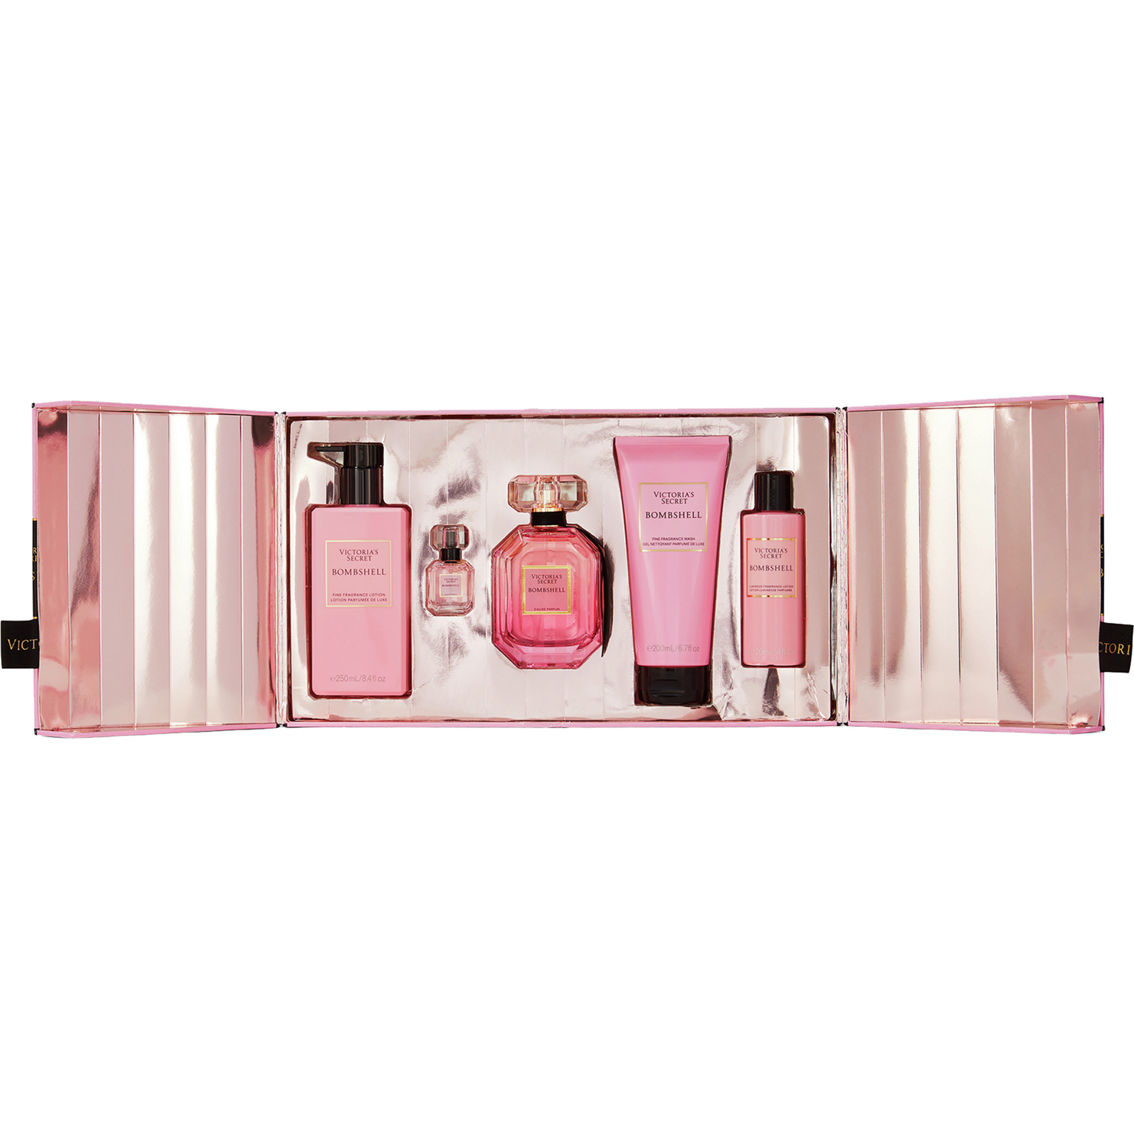 Victoria's Secret Bombshell Large Luxe Fragrance Box 5 pc.